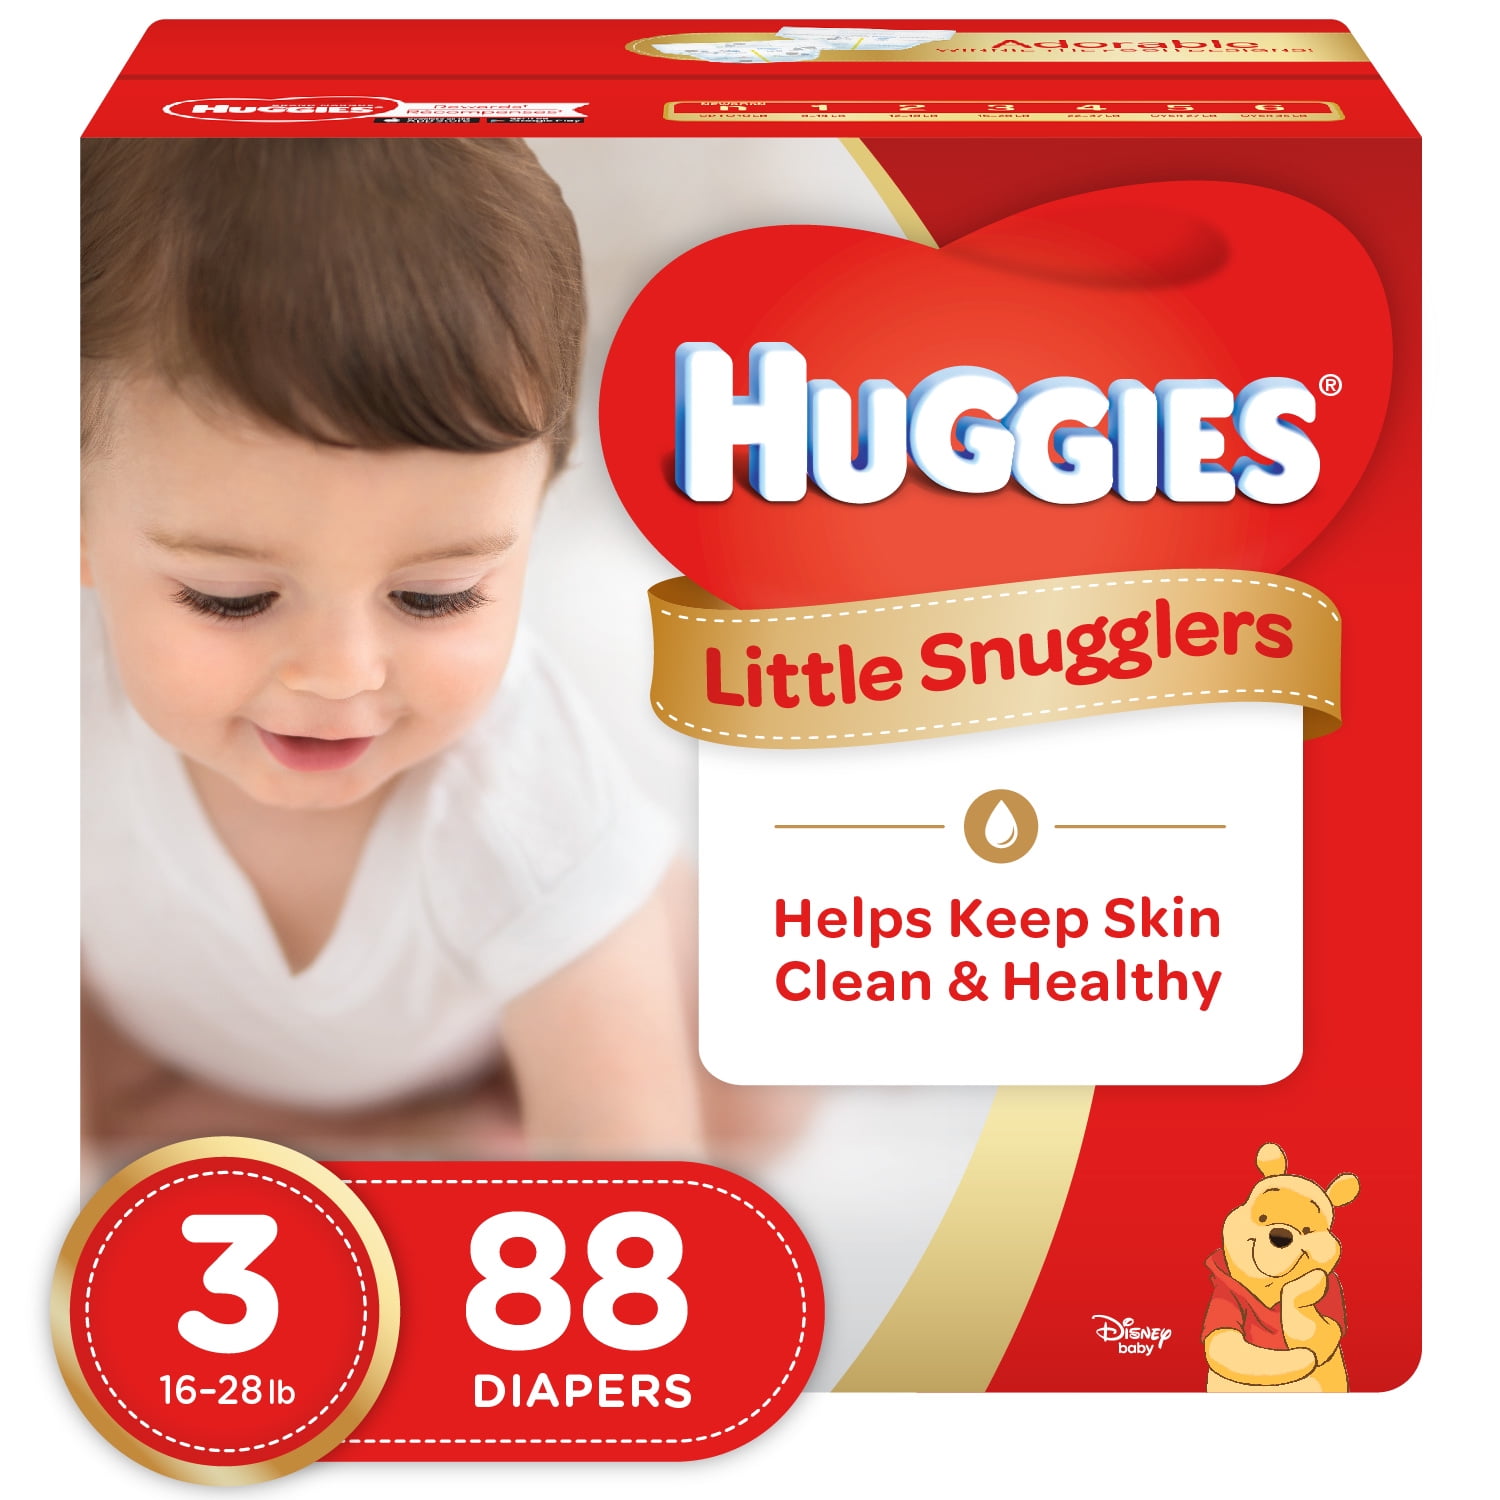 for 6-9 lbs. Size Newborn Little Snugglers Baby Diapers HUGGIES 88 Count. 